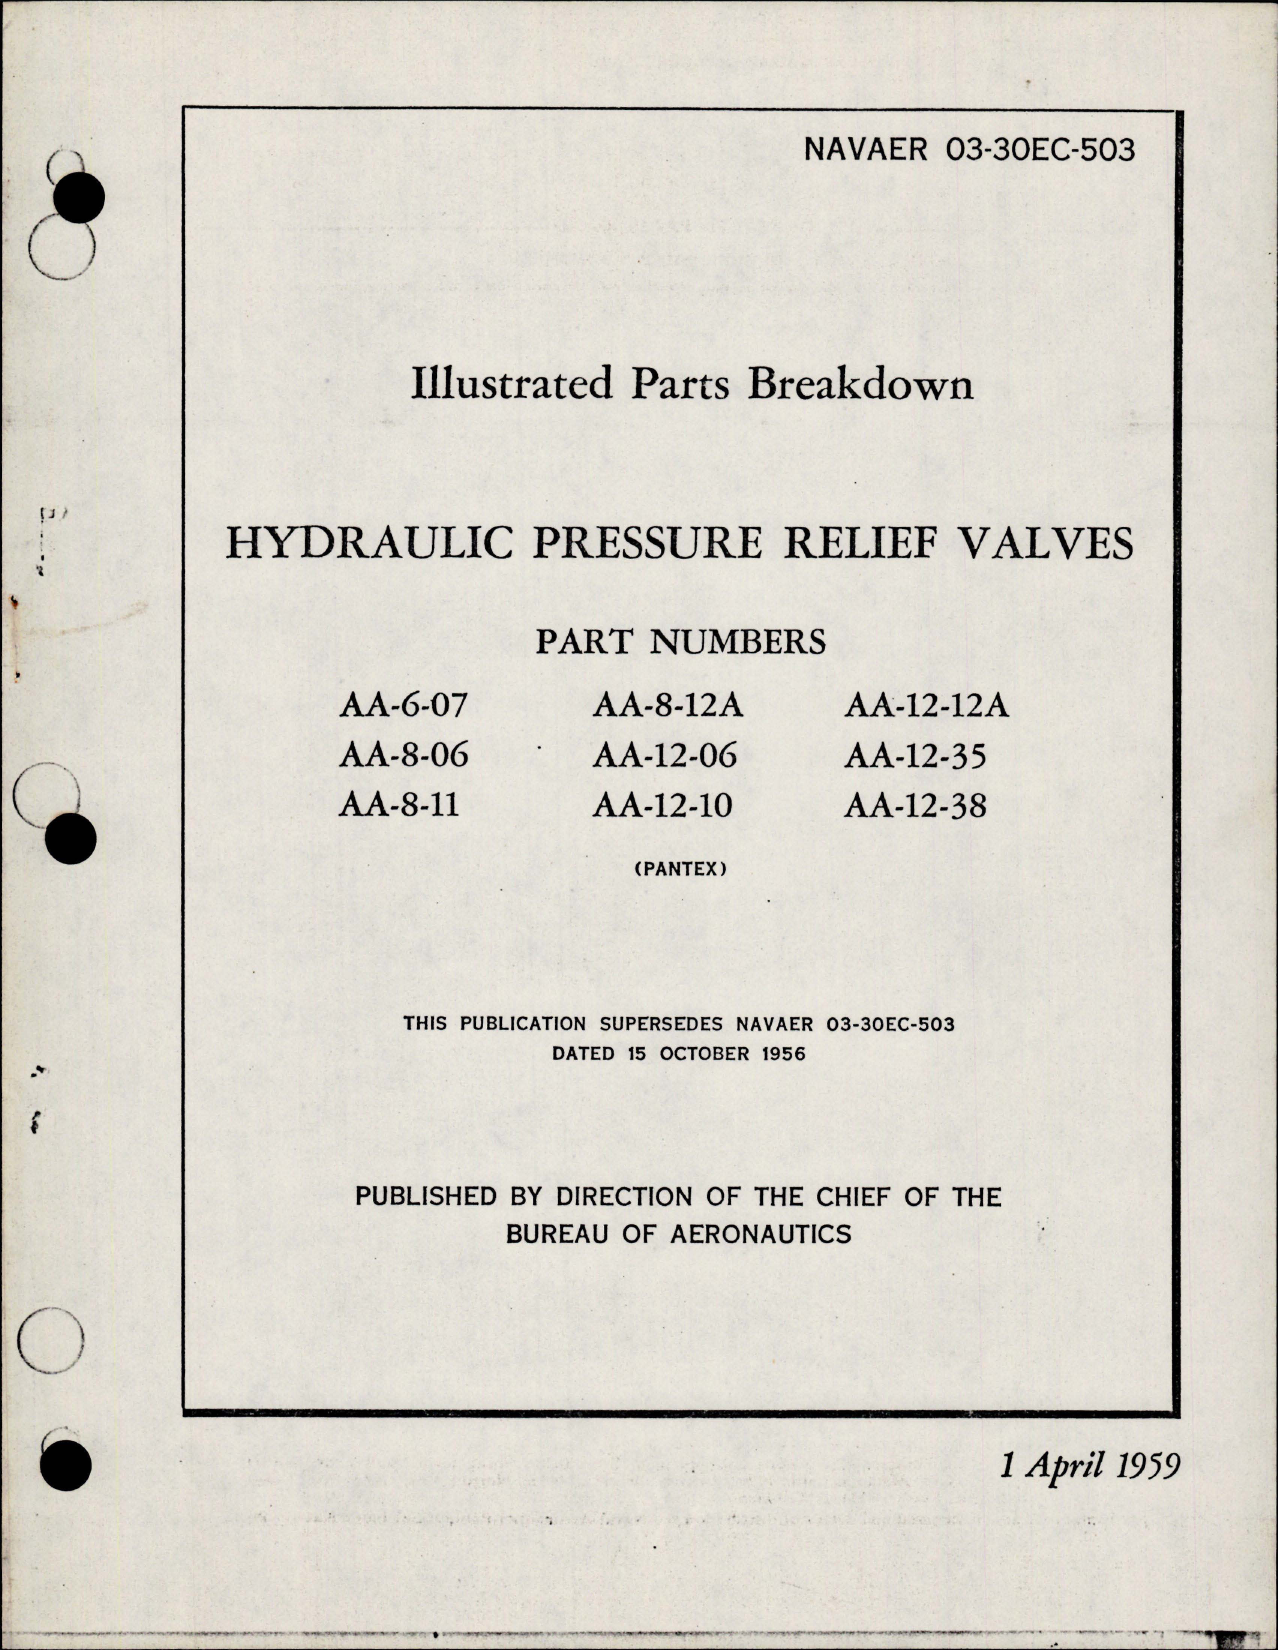 Sample page 1 from AirCorps Library document: Illustrated Parts Breakdown for Hydraulic Pressure Relief Valve